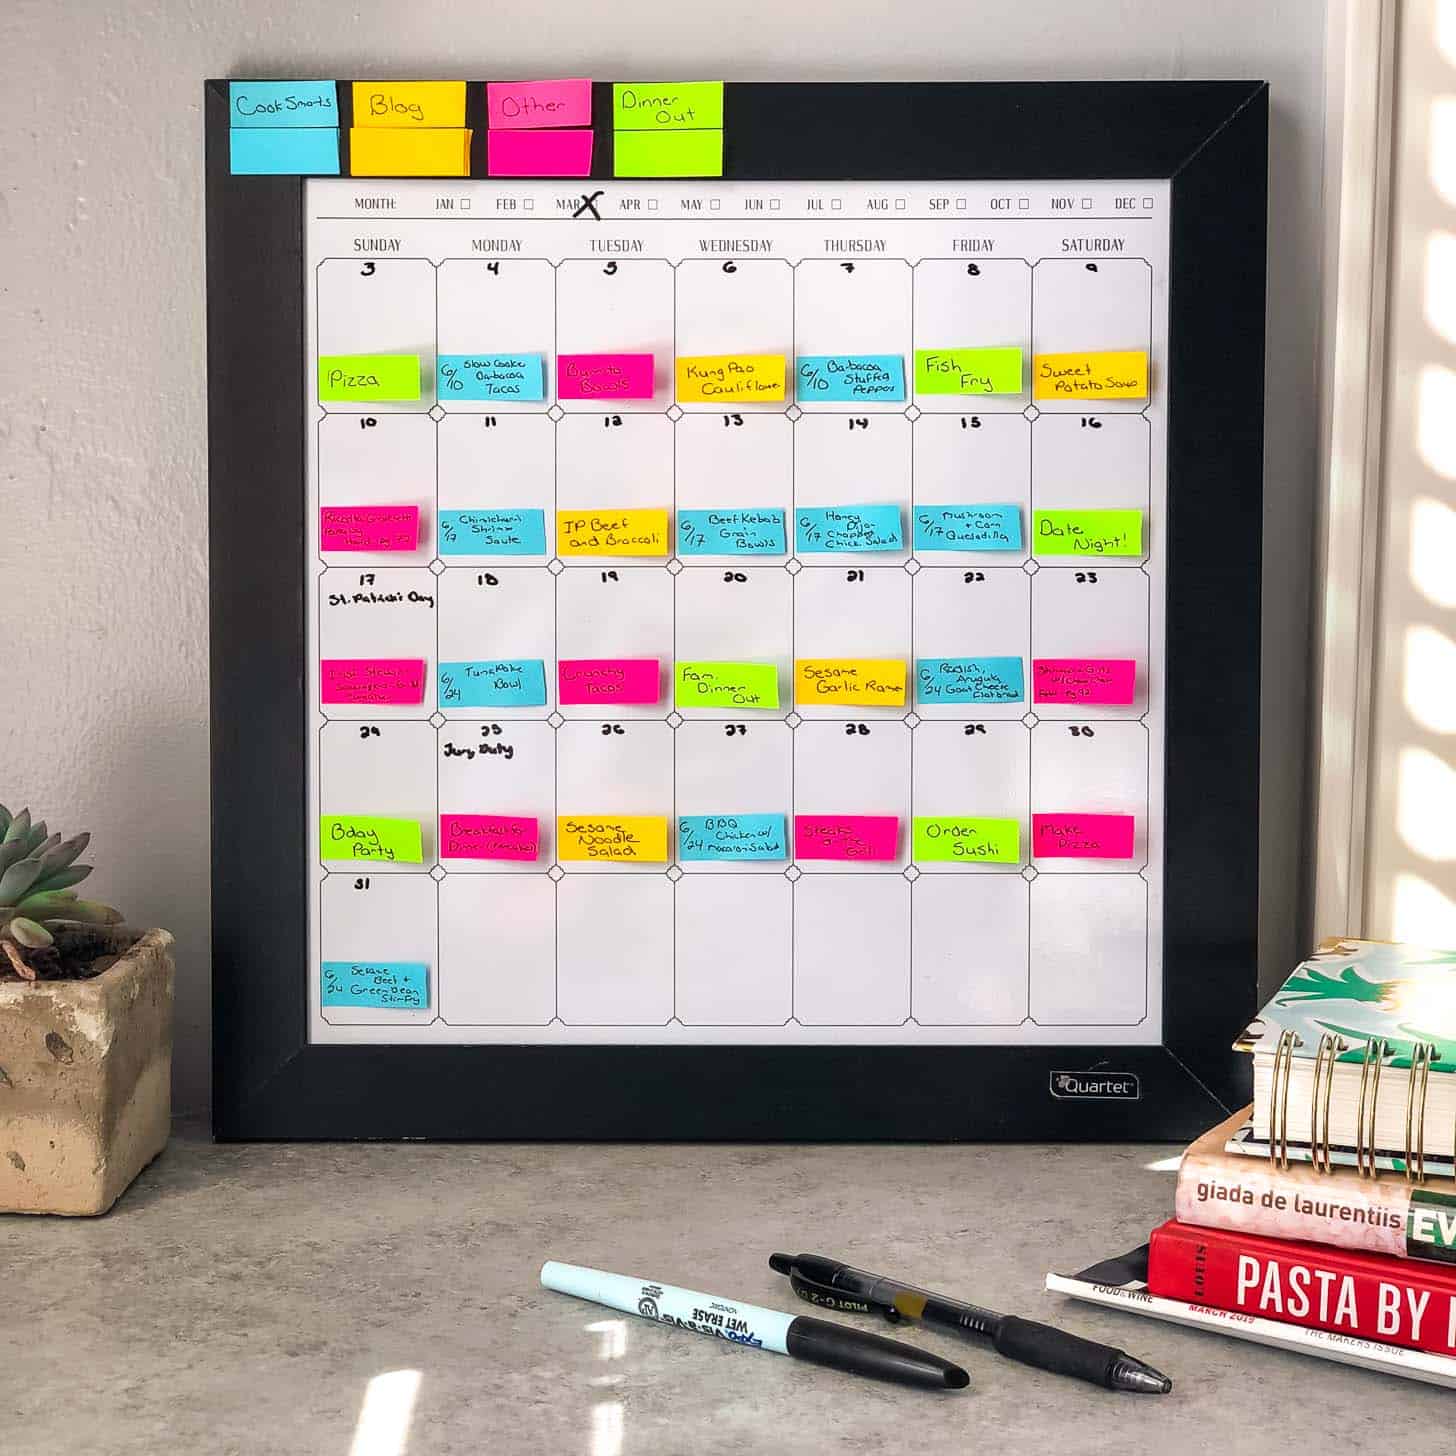 Meal Planning for a Month on a dry erase board